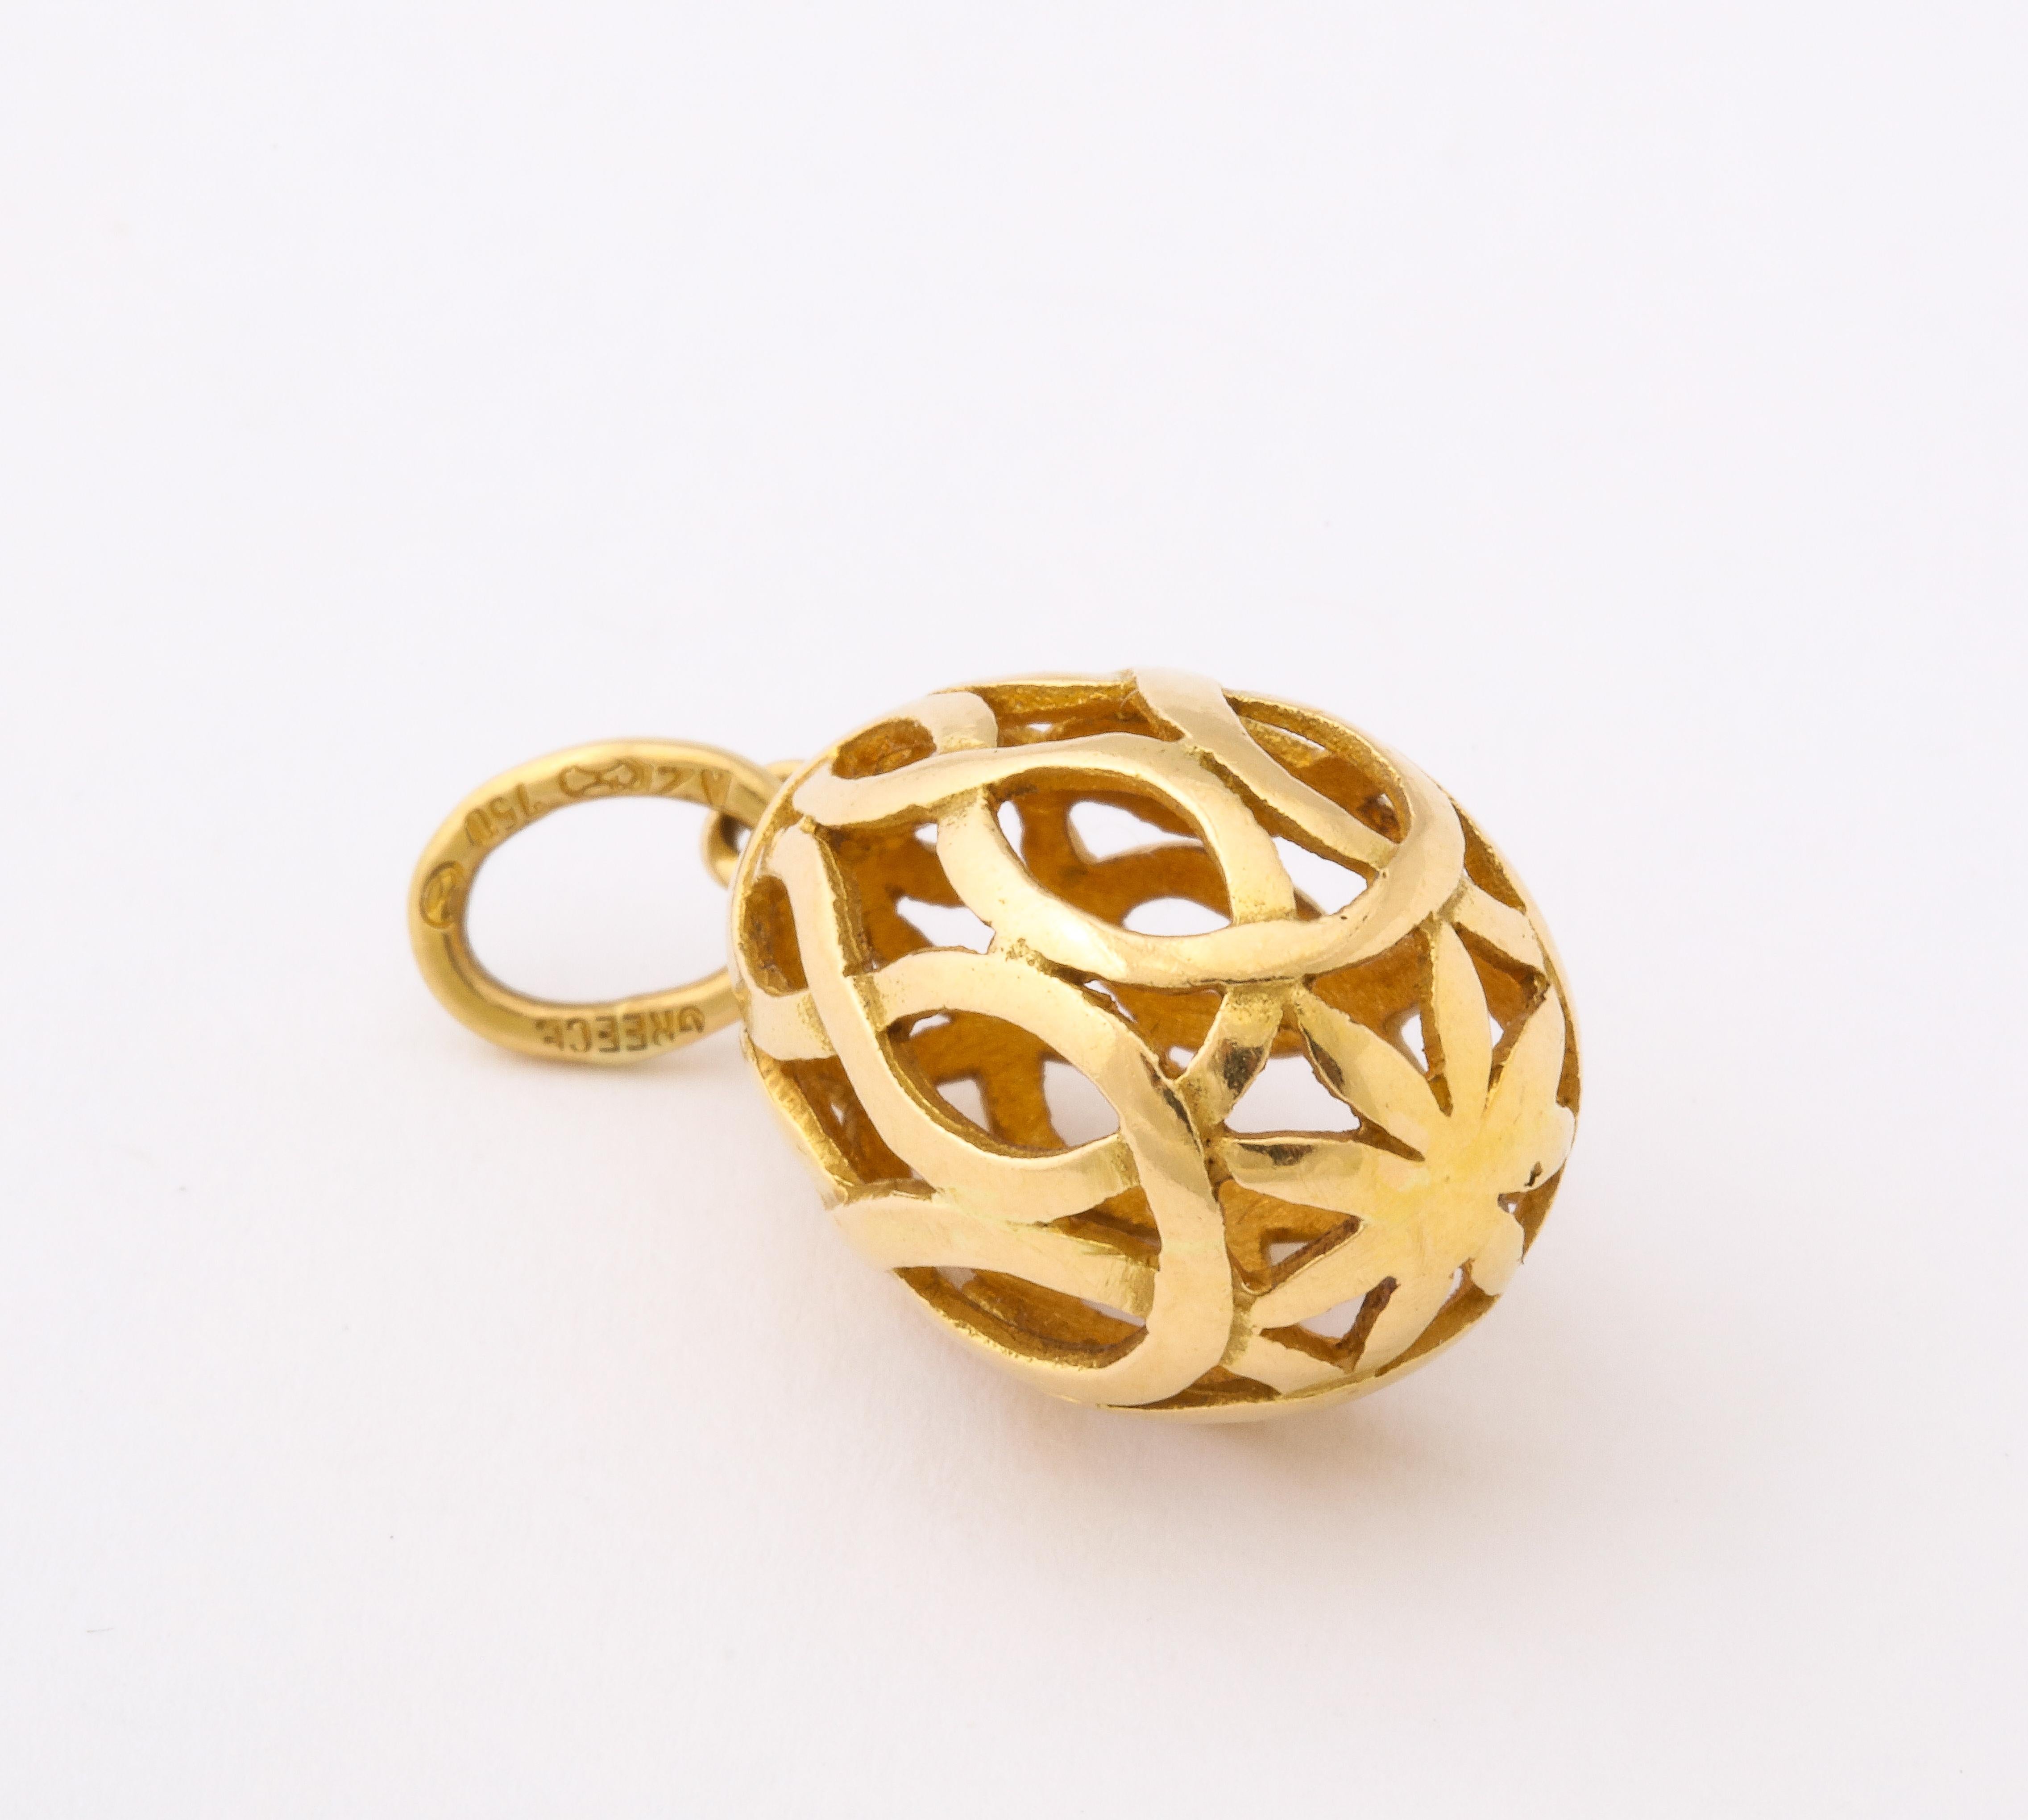 An egg pendant of 18 kt gold made in Greece in an open lattice work design. Egg jewelry has many possibilities of personal meaning to different people. In Greek tradition, the egg was a symbol of resurrection, rebirth and renewal. The intertwining